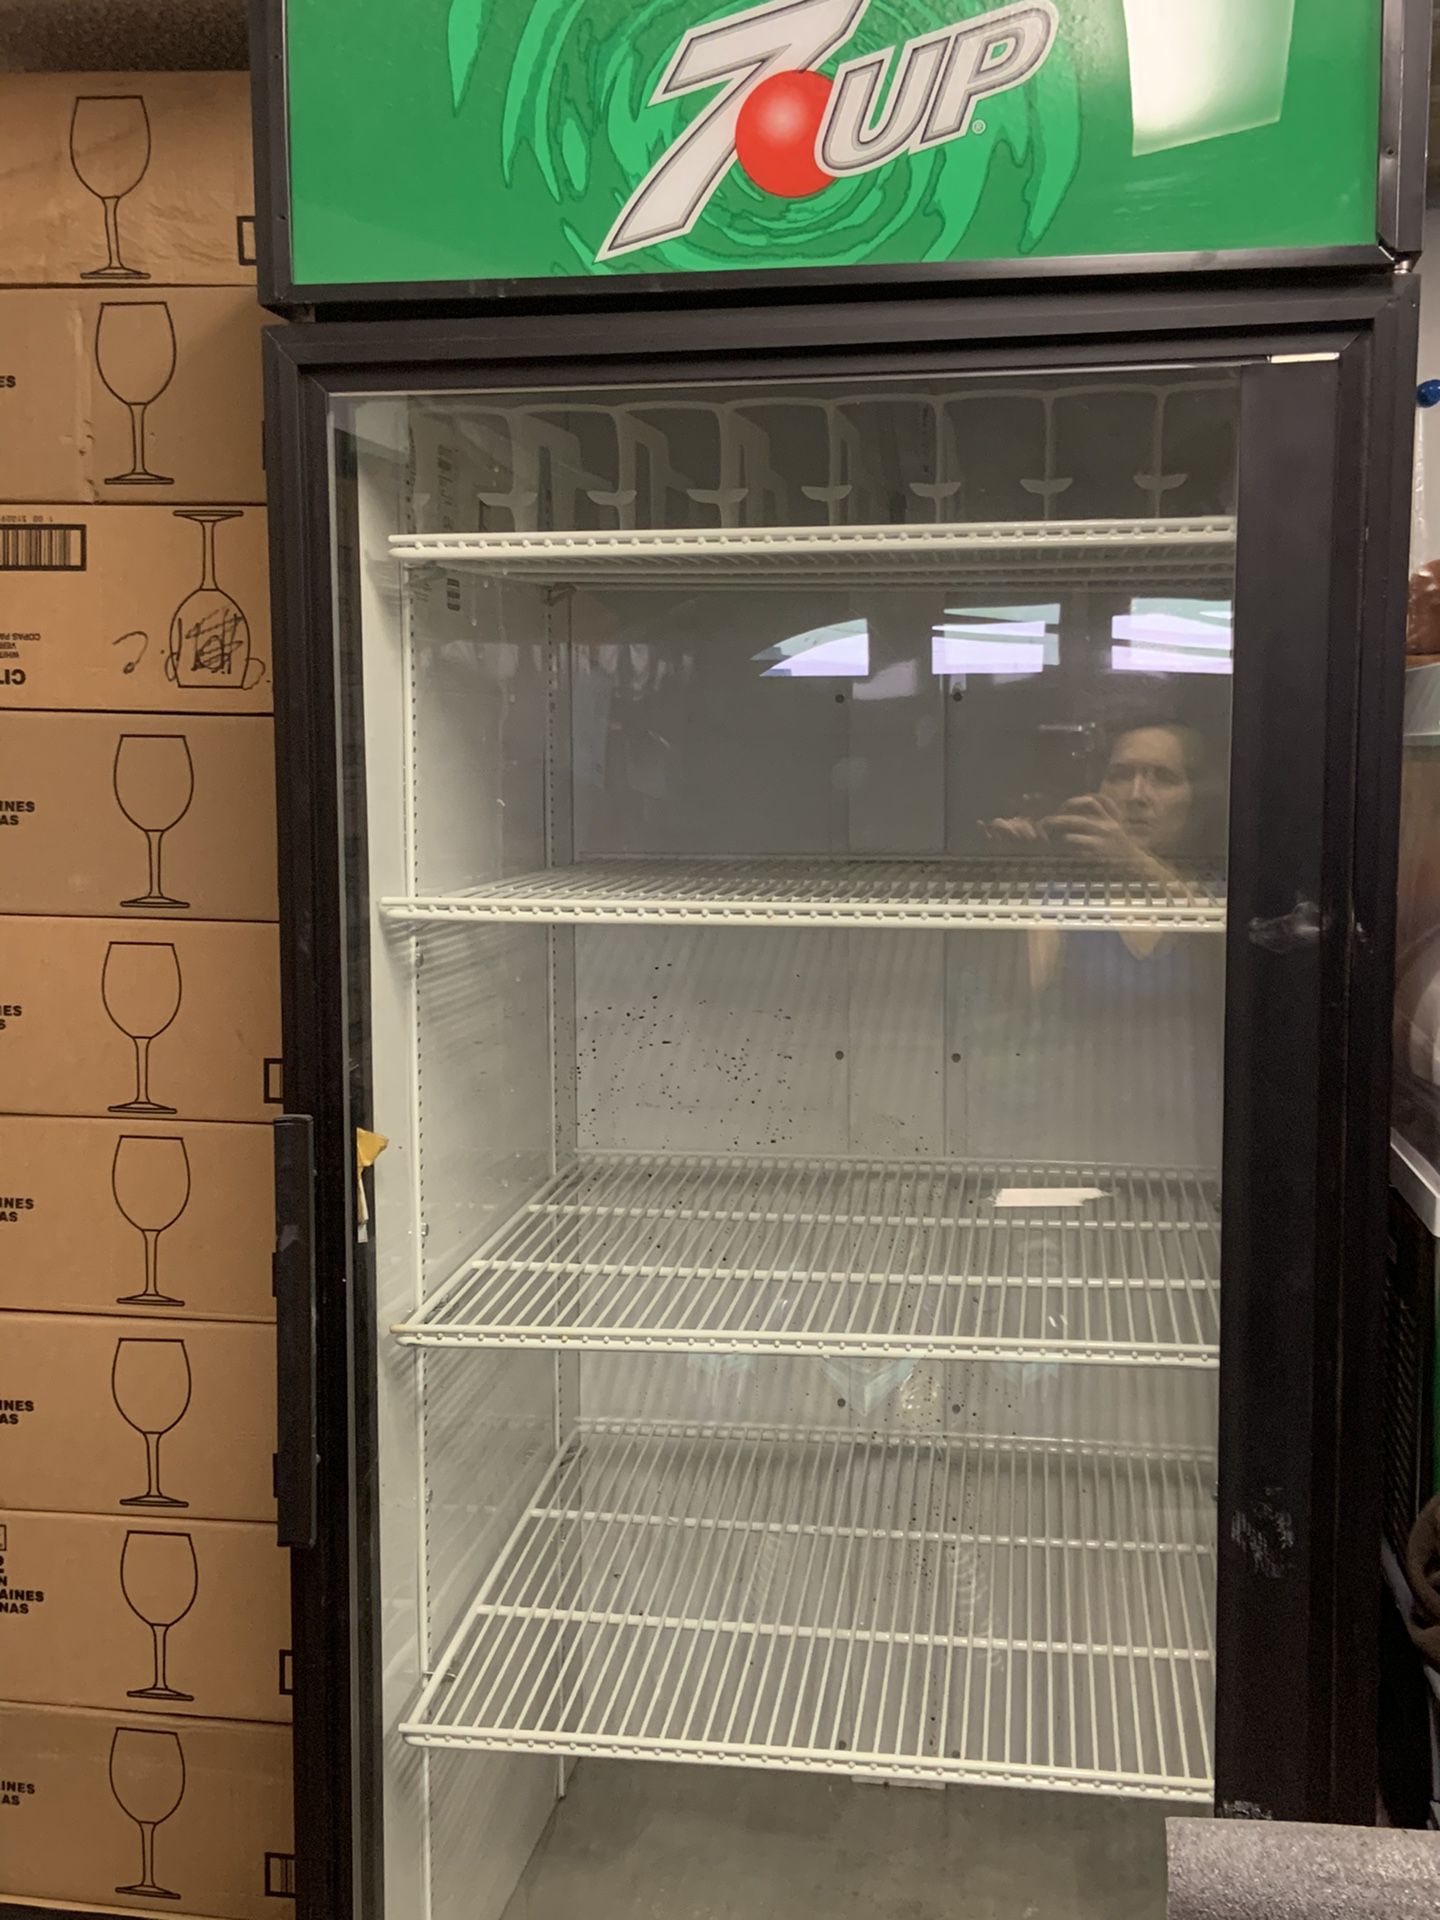 7UP Commercial Refrigerator